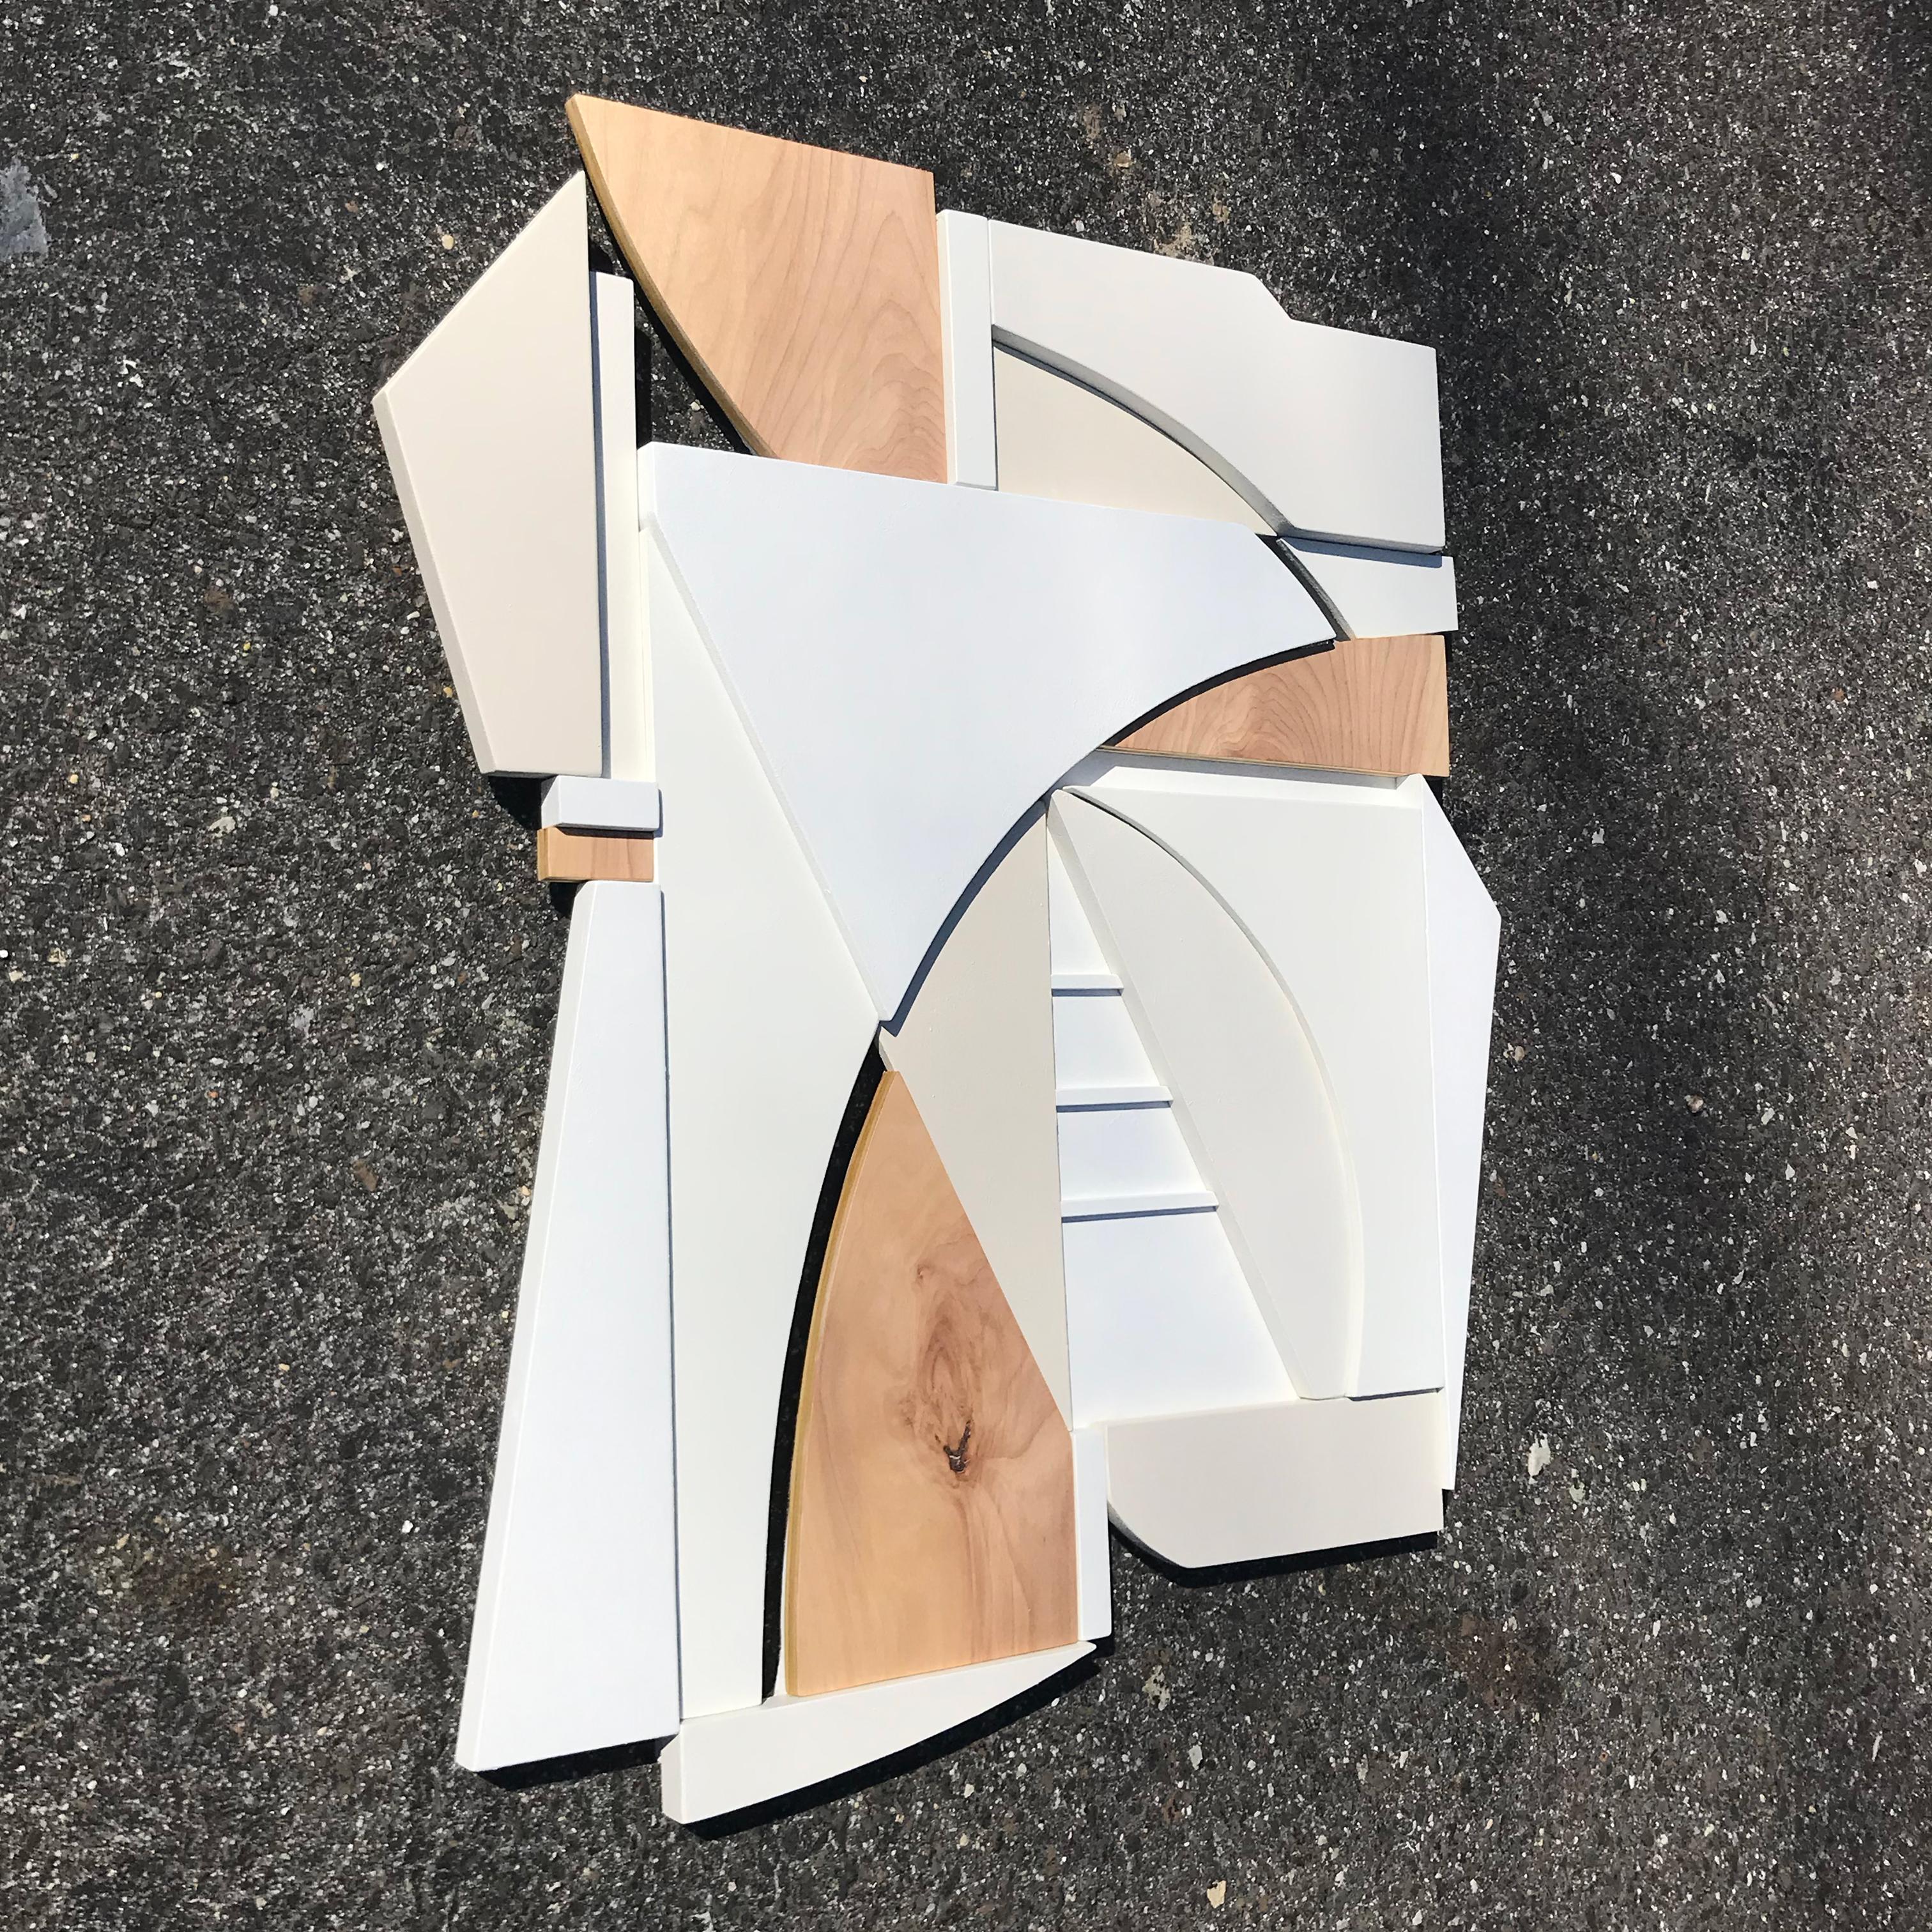 King is a modern mixed media wall sculpture. Made from Italian plaster paint, paint, birch panel, and MDF. This is the second piece I made as I begin to experiment with additional materials in my wall sculptures, outside of paint, resin, wood and